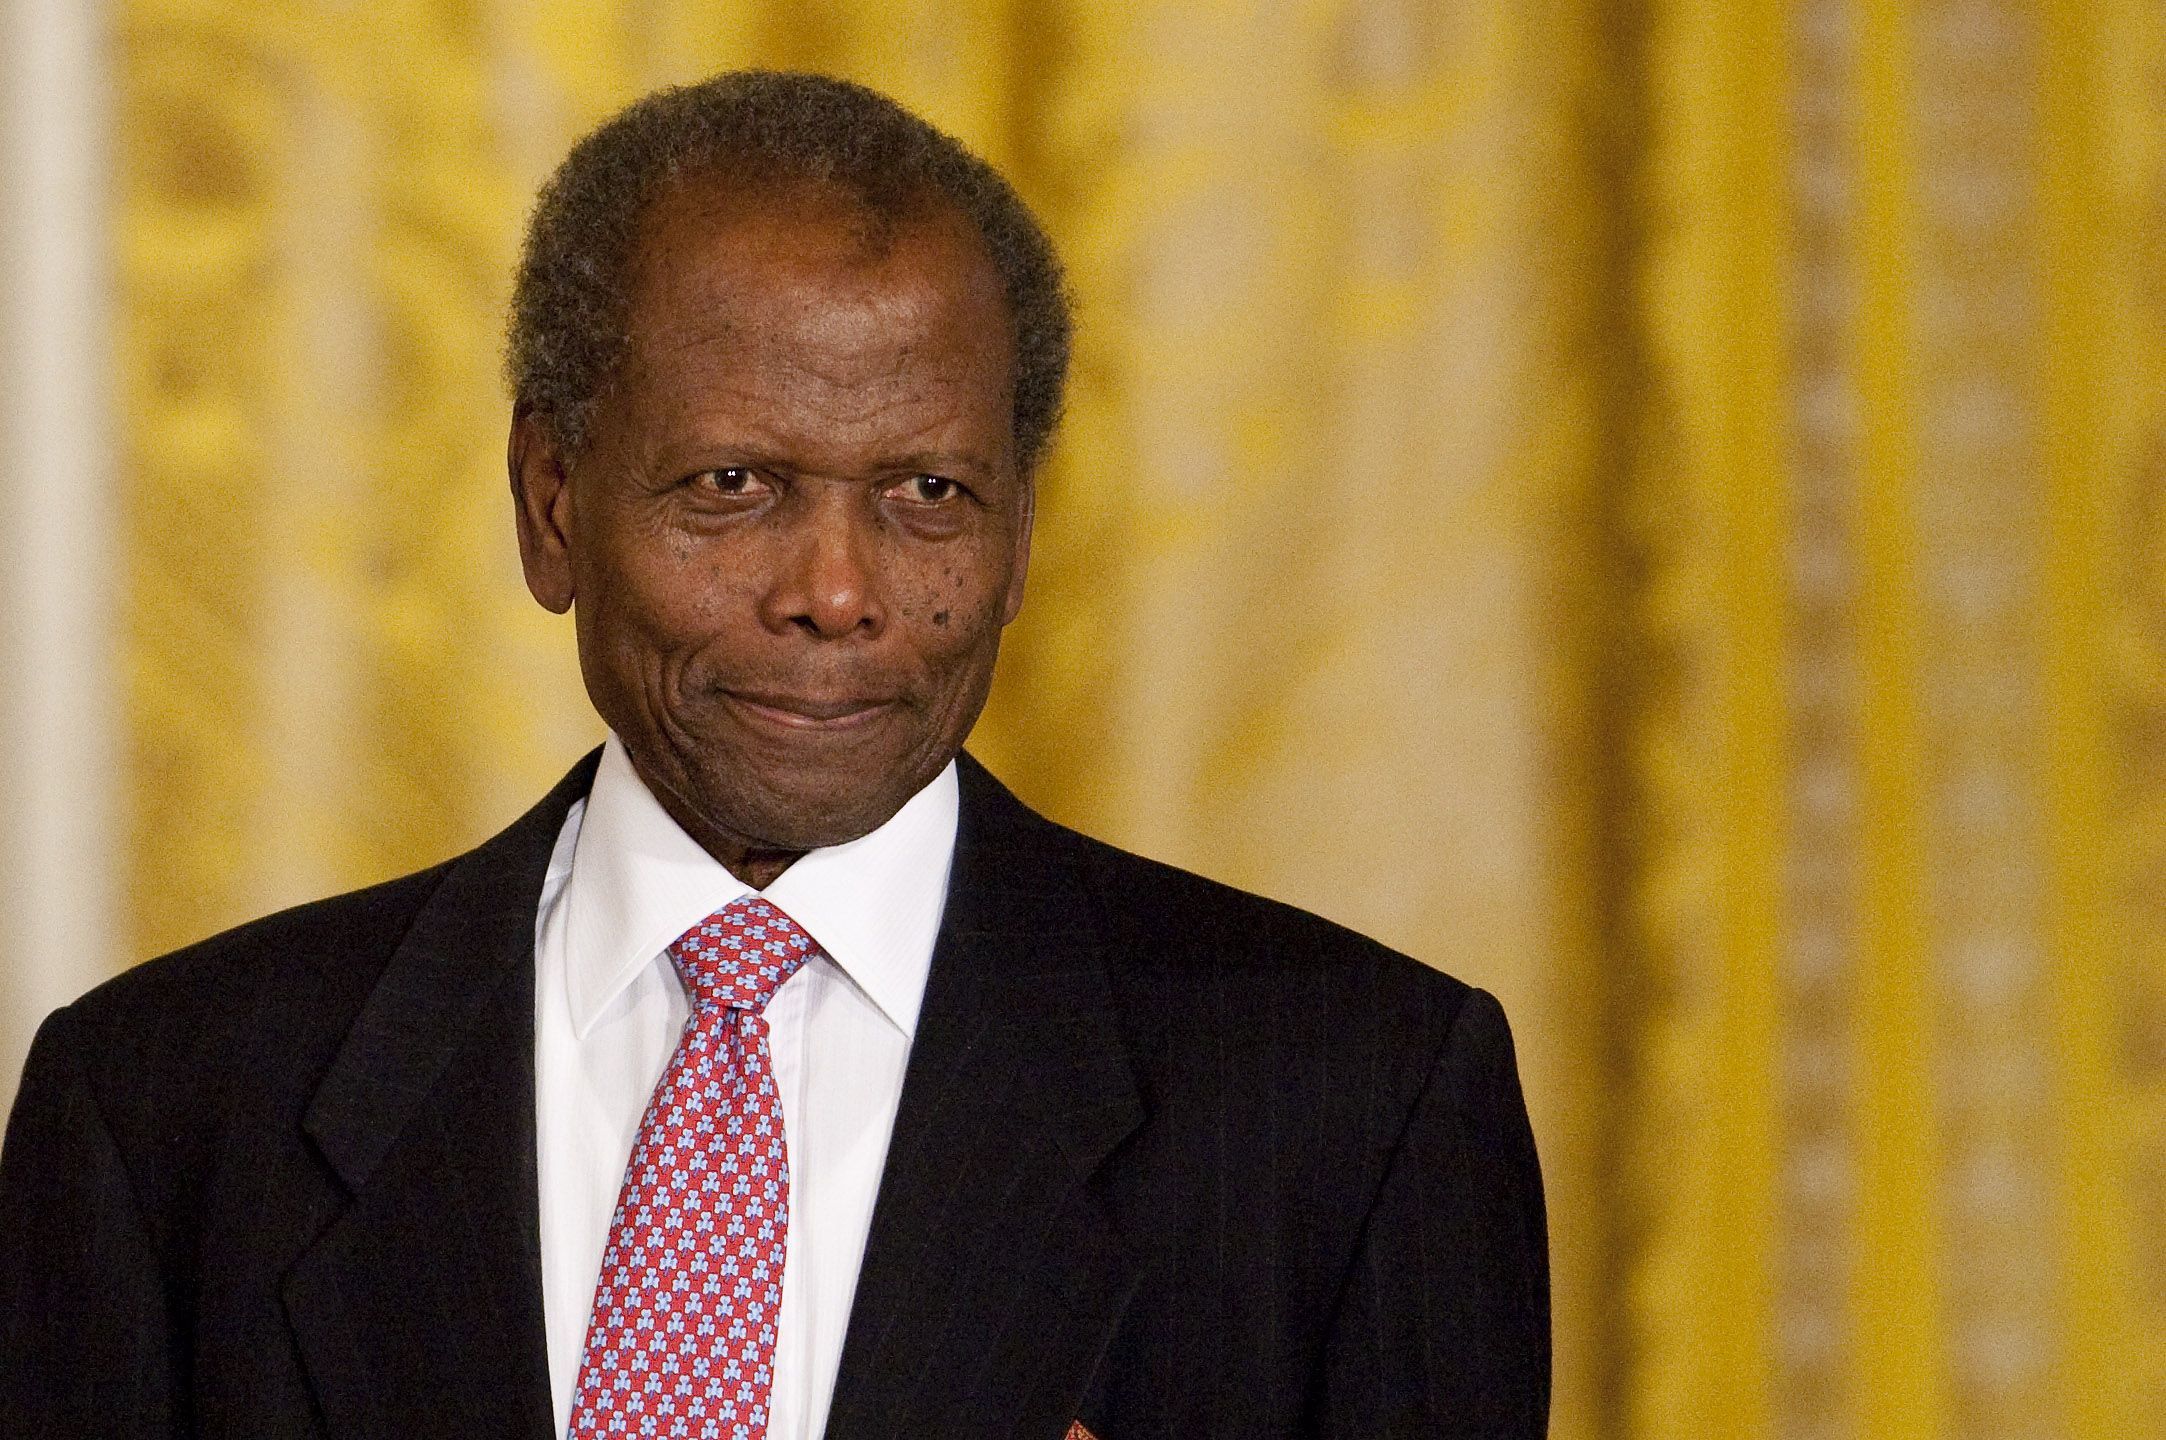 Actor Sidney Poitier arrives at the 2009 Presidential Medal of Freedom ceremony in the East Room of the White House in Washington, D.C., U.S.